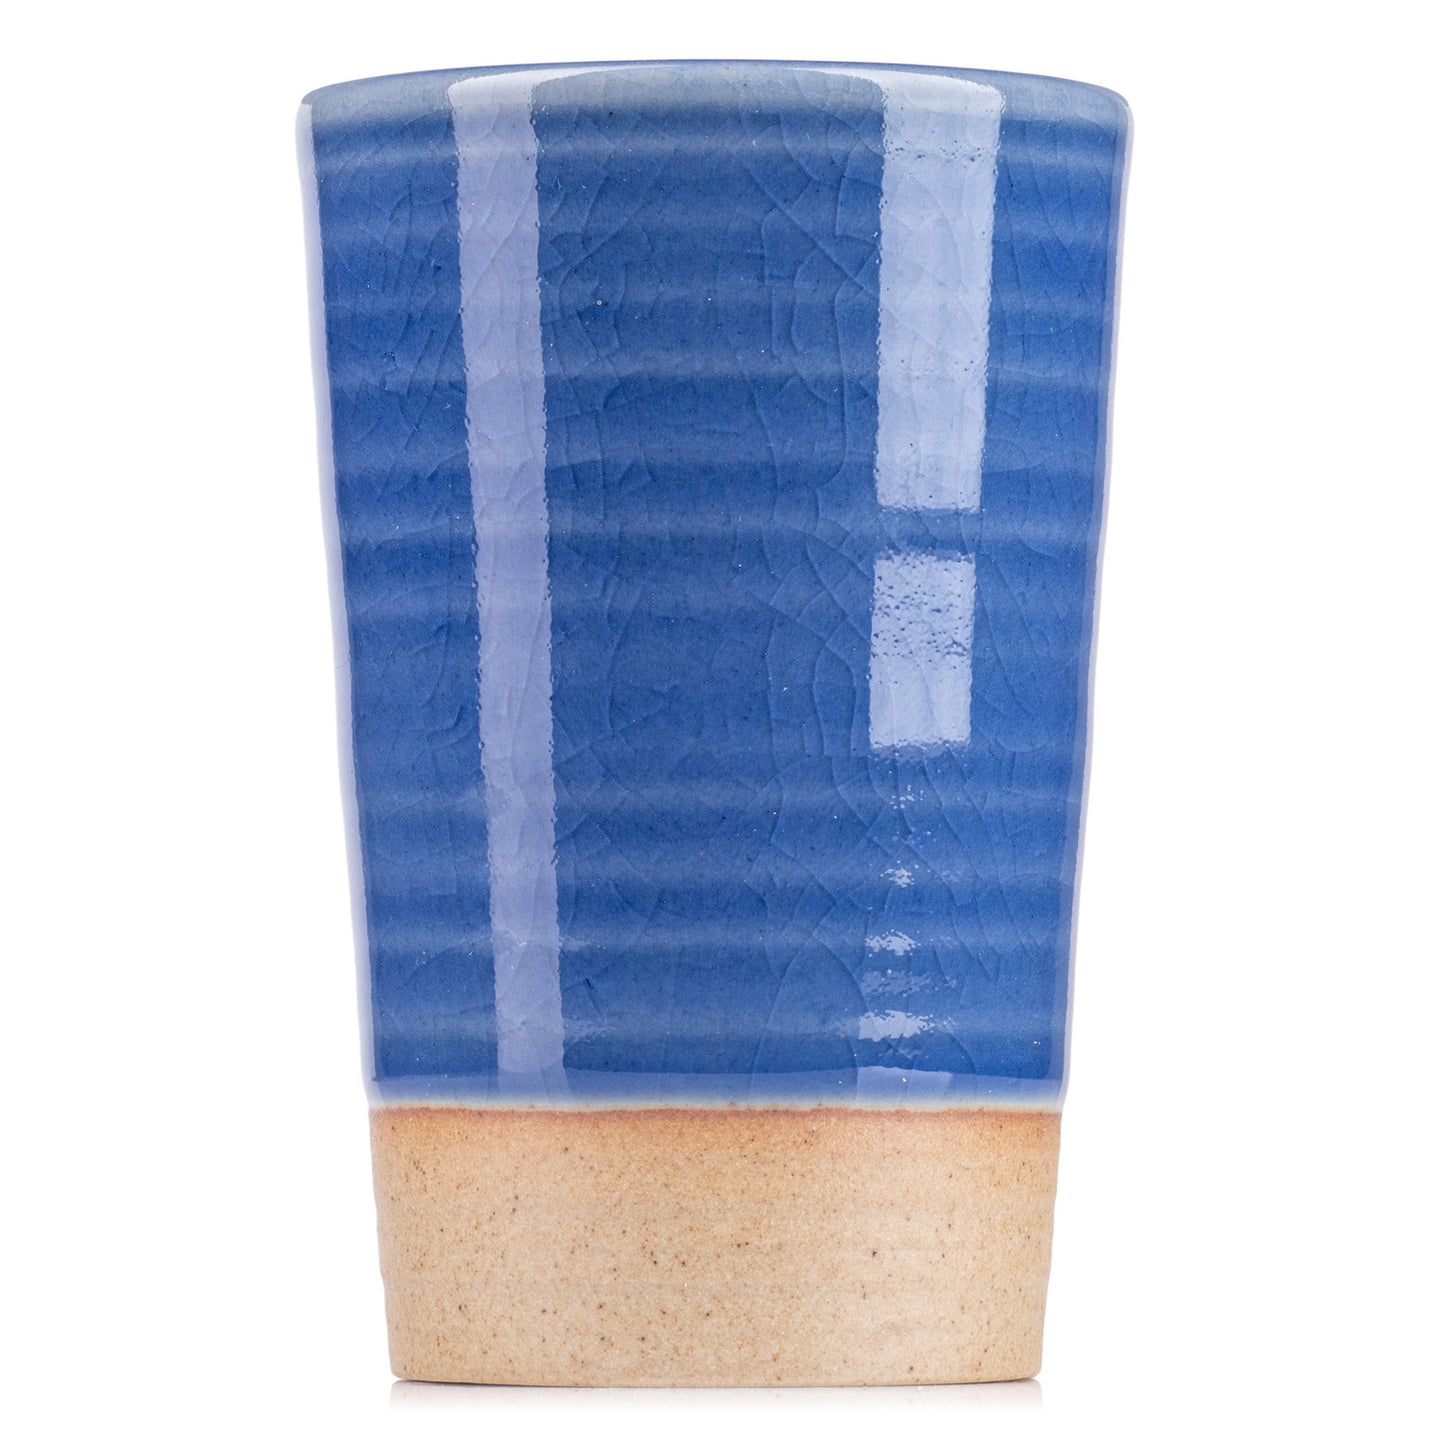 Tall Blue Quality Japanese Sake Cup